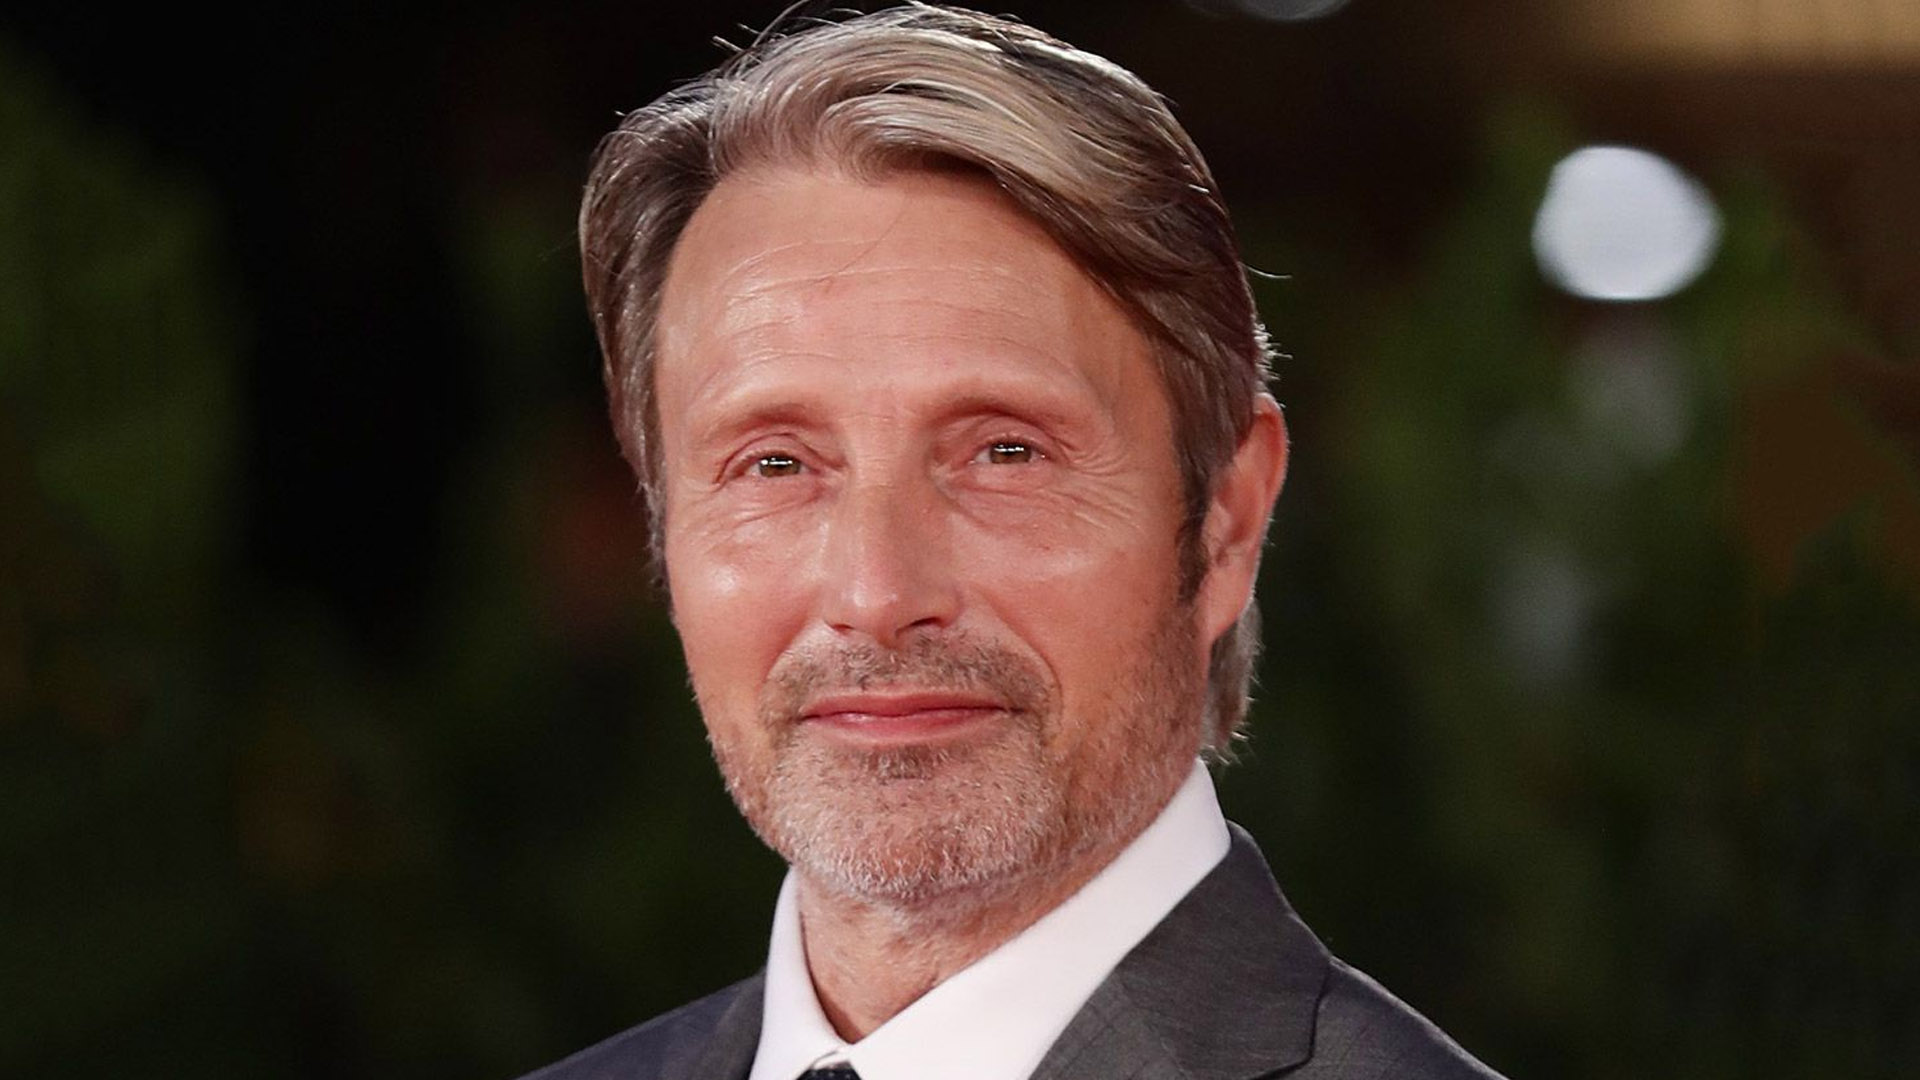 Mads Mikkelsen Shared Role Preferences He Has In Movies.